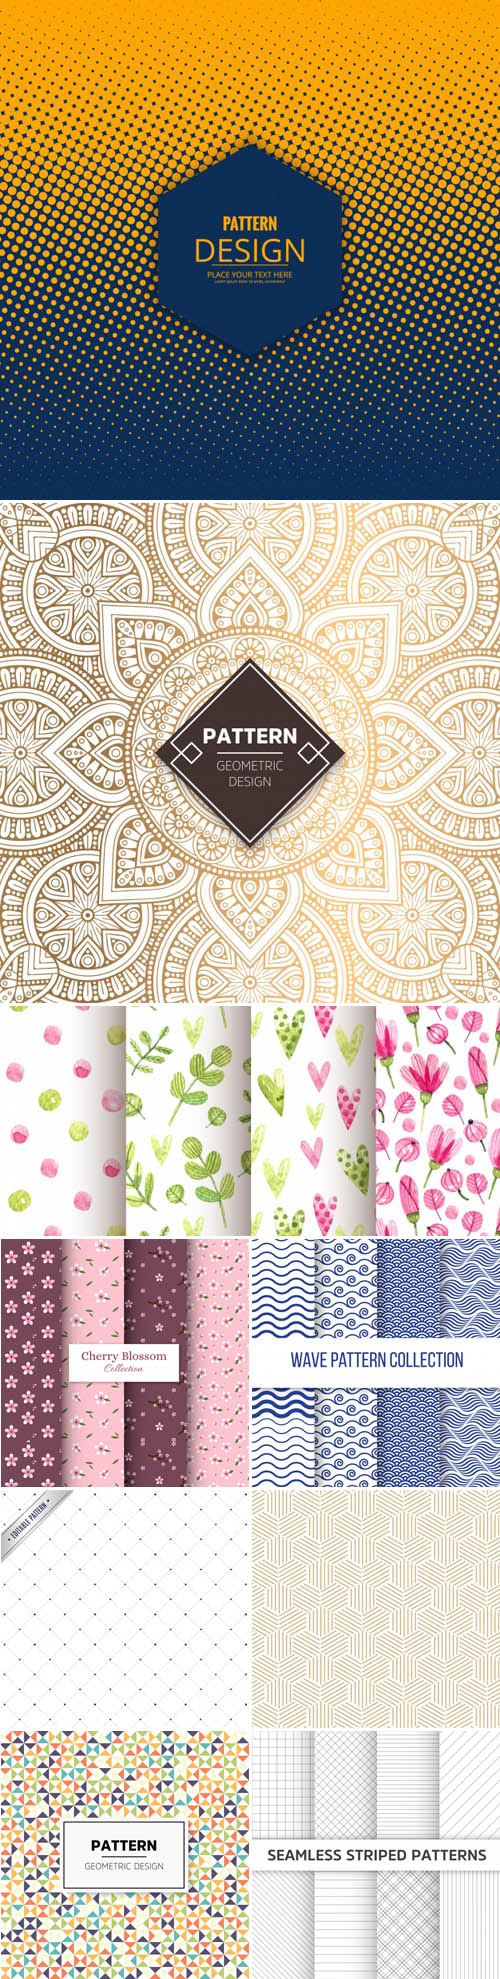 30 Vector Patterns Collection